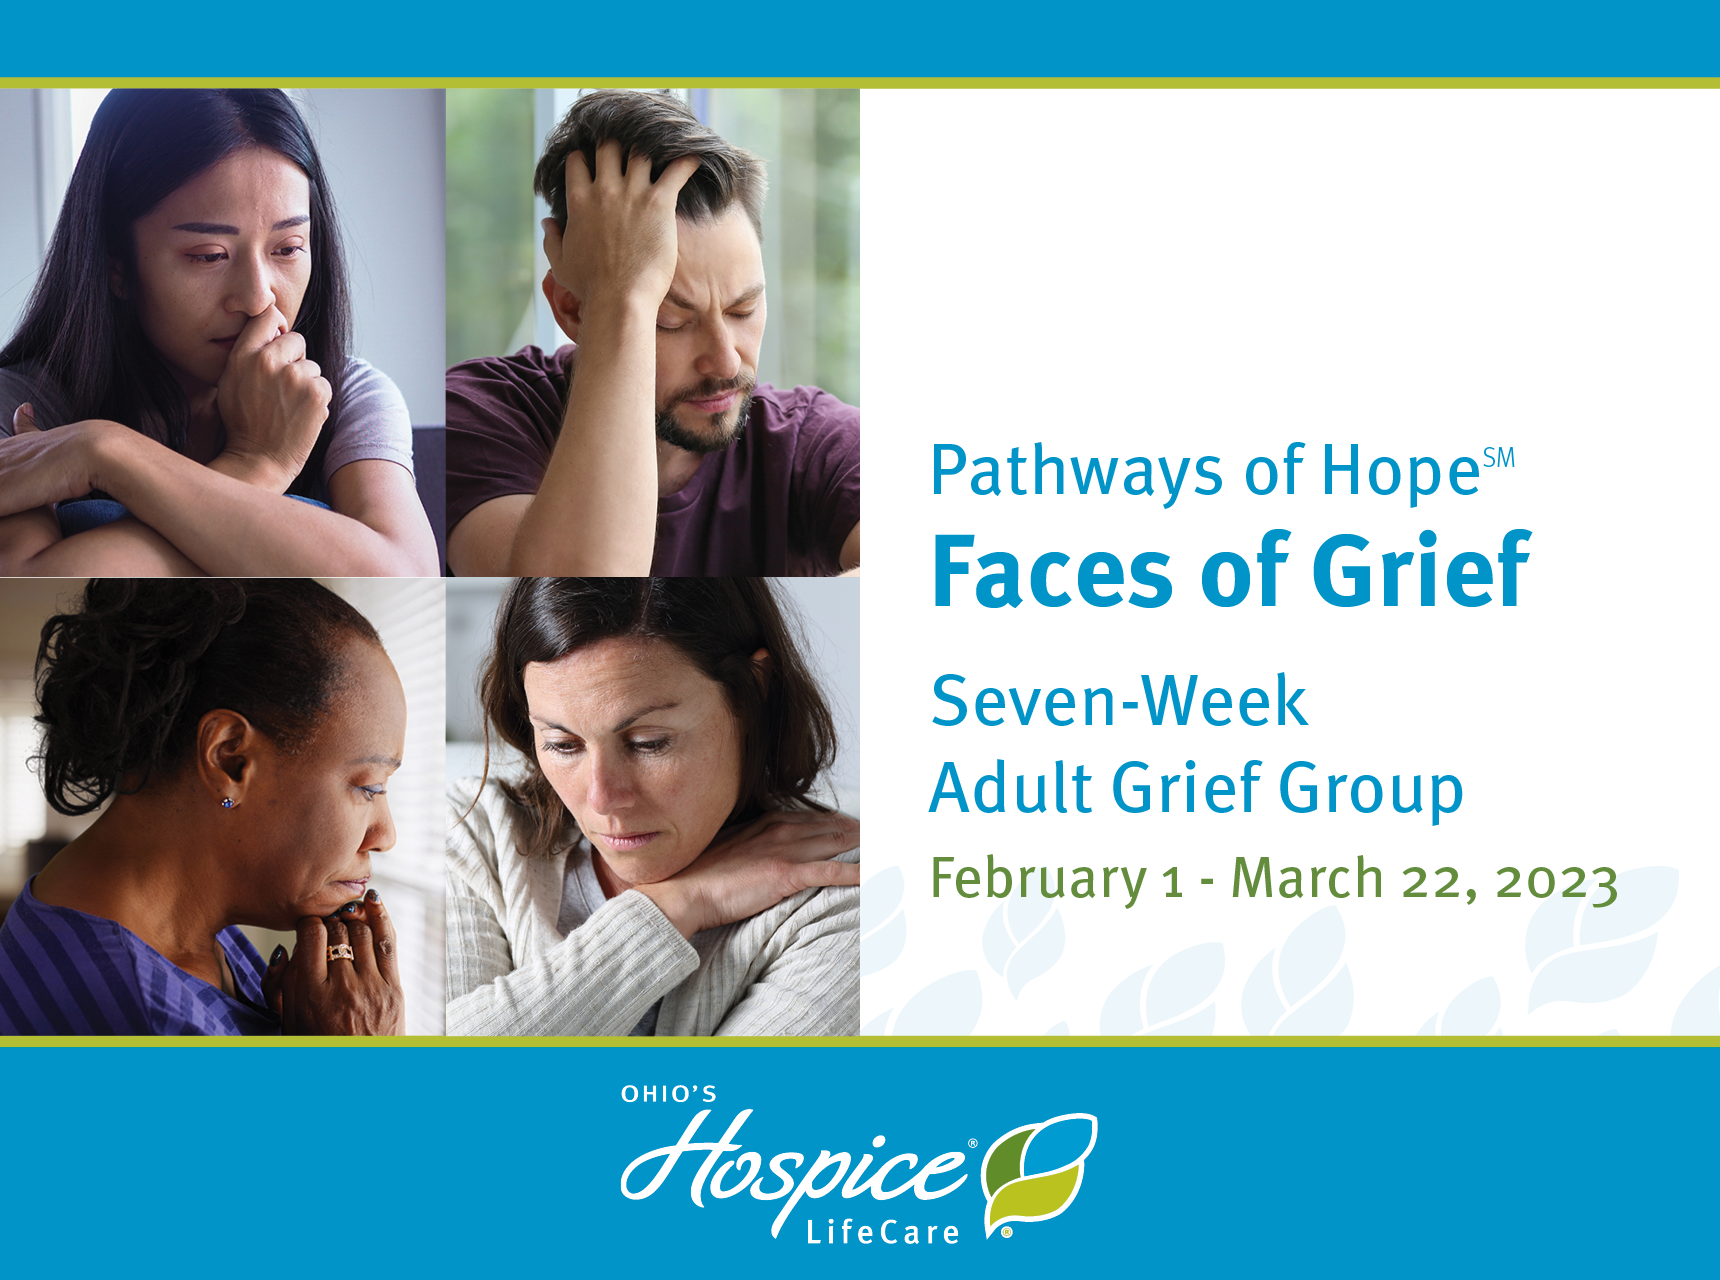 Pathways of Hope Faces of Grief Seven-Week Adult Grief Group